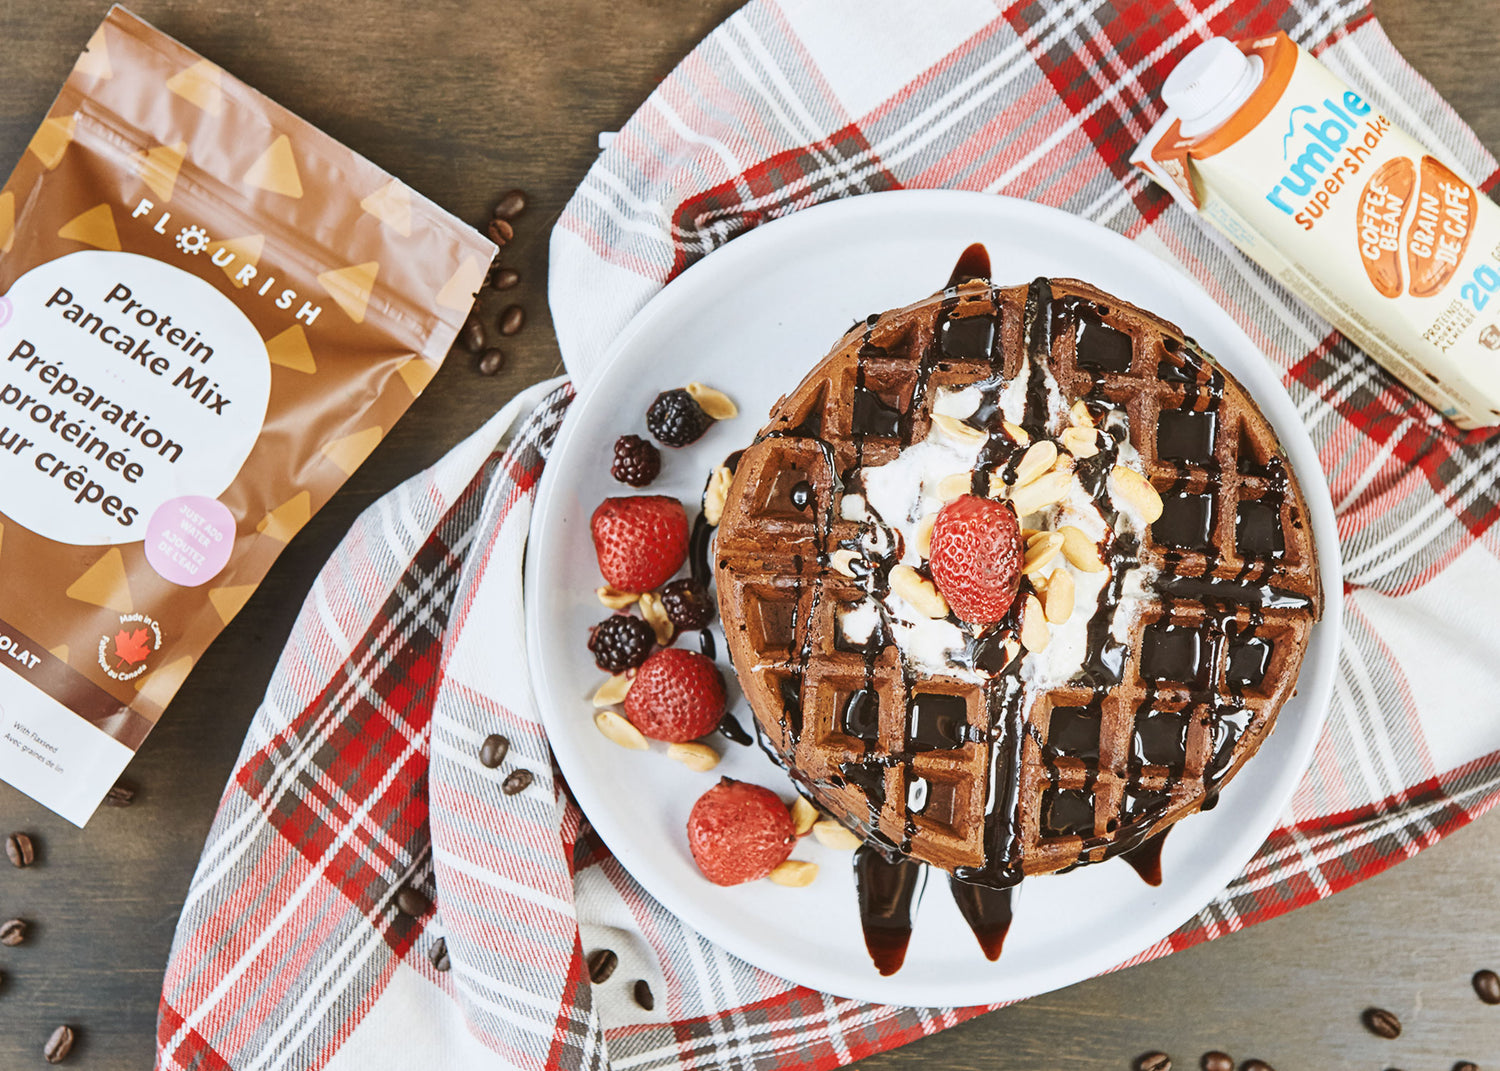 Chocolate Mocha Protein Waffle Recipe and Contest!